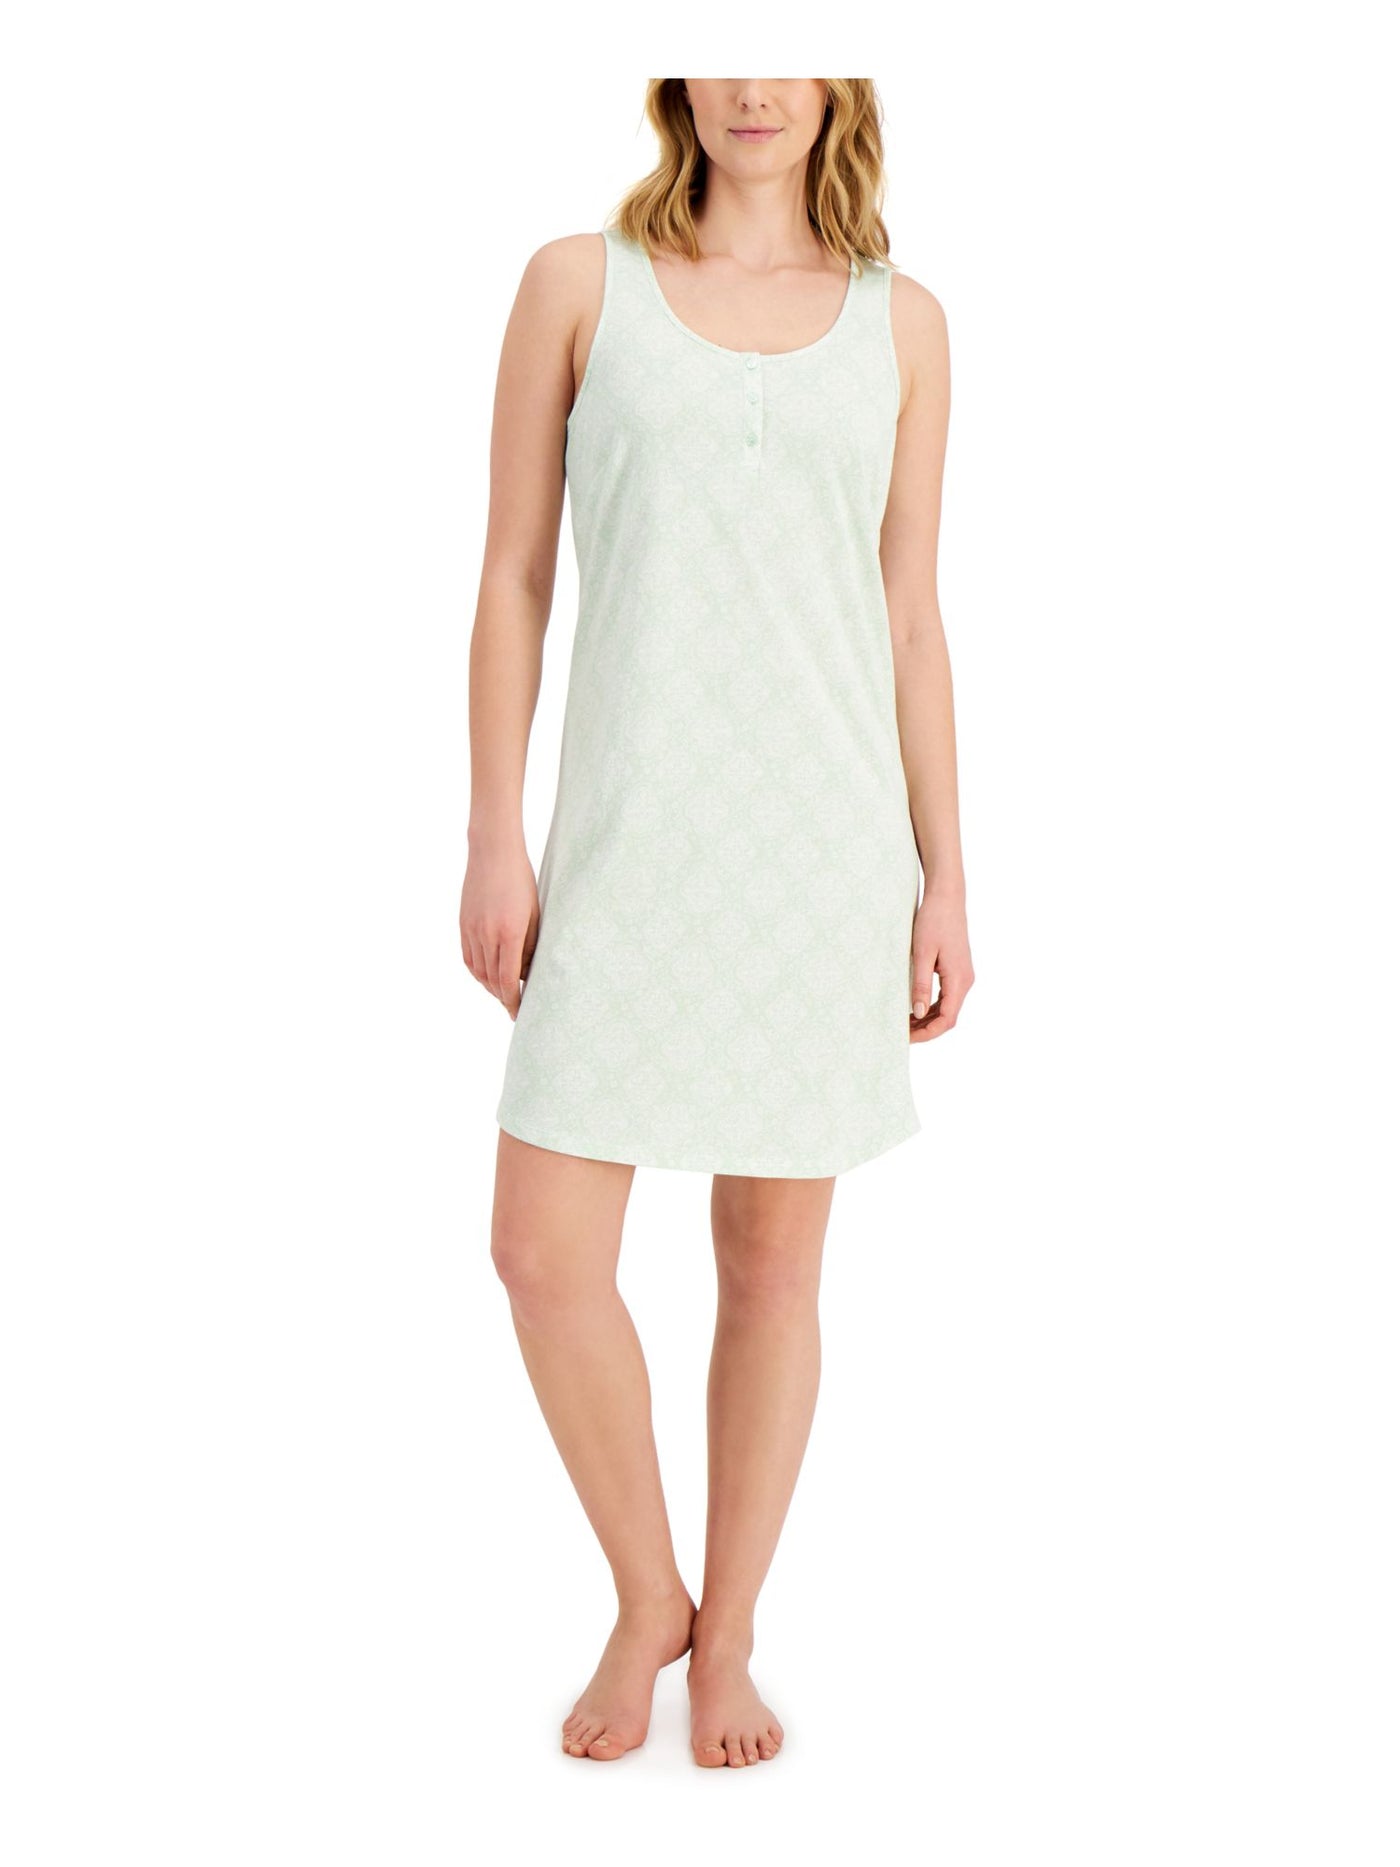 CHARTER CLUB Intimates Green Chemise Nightgown S